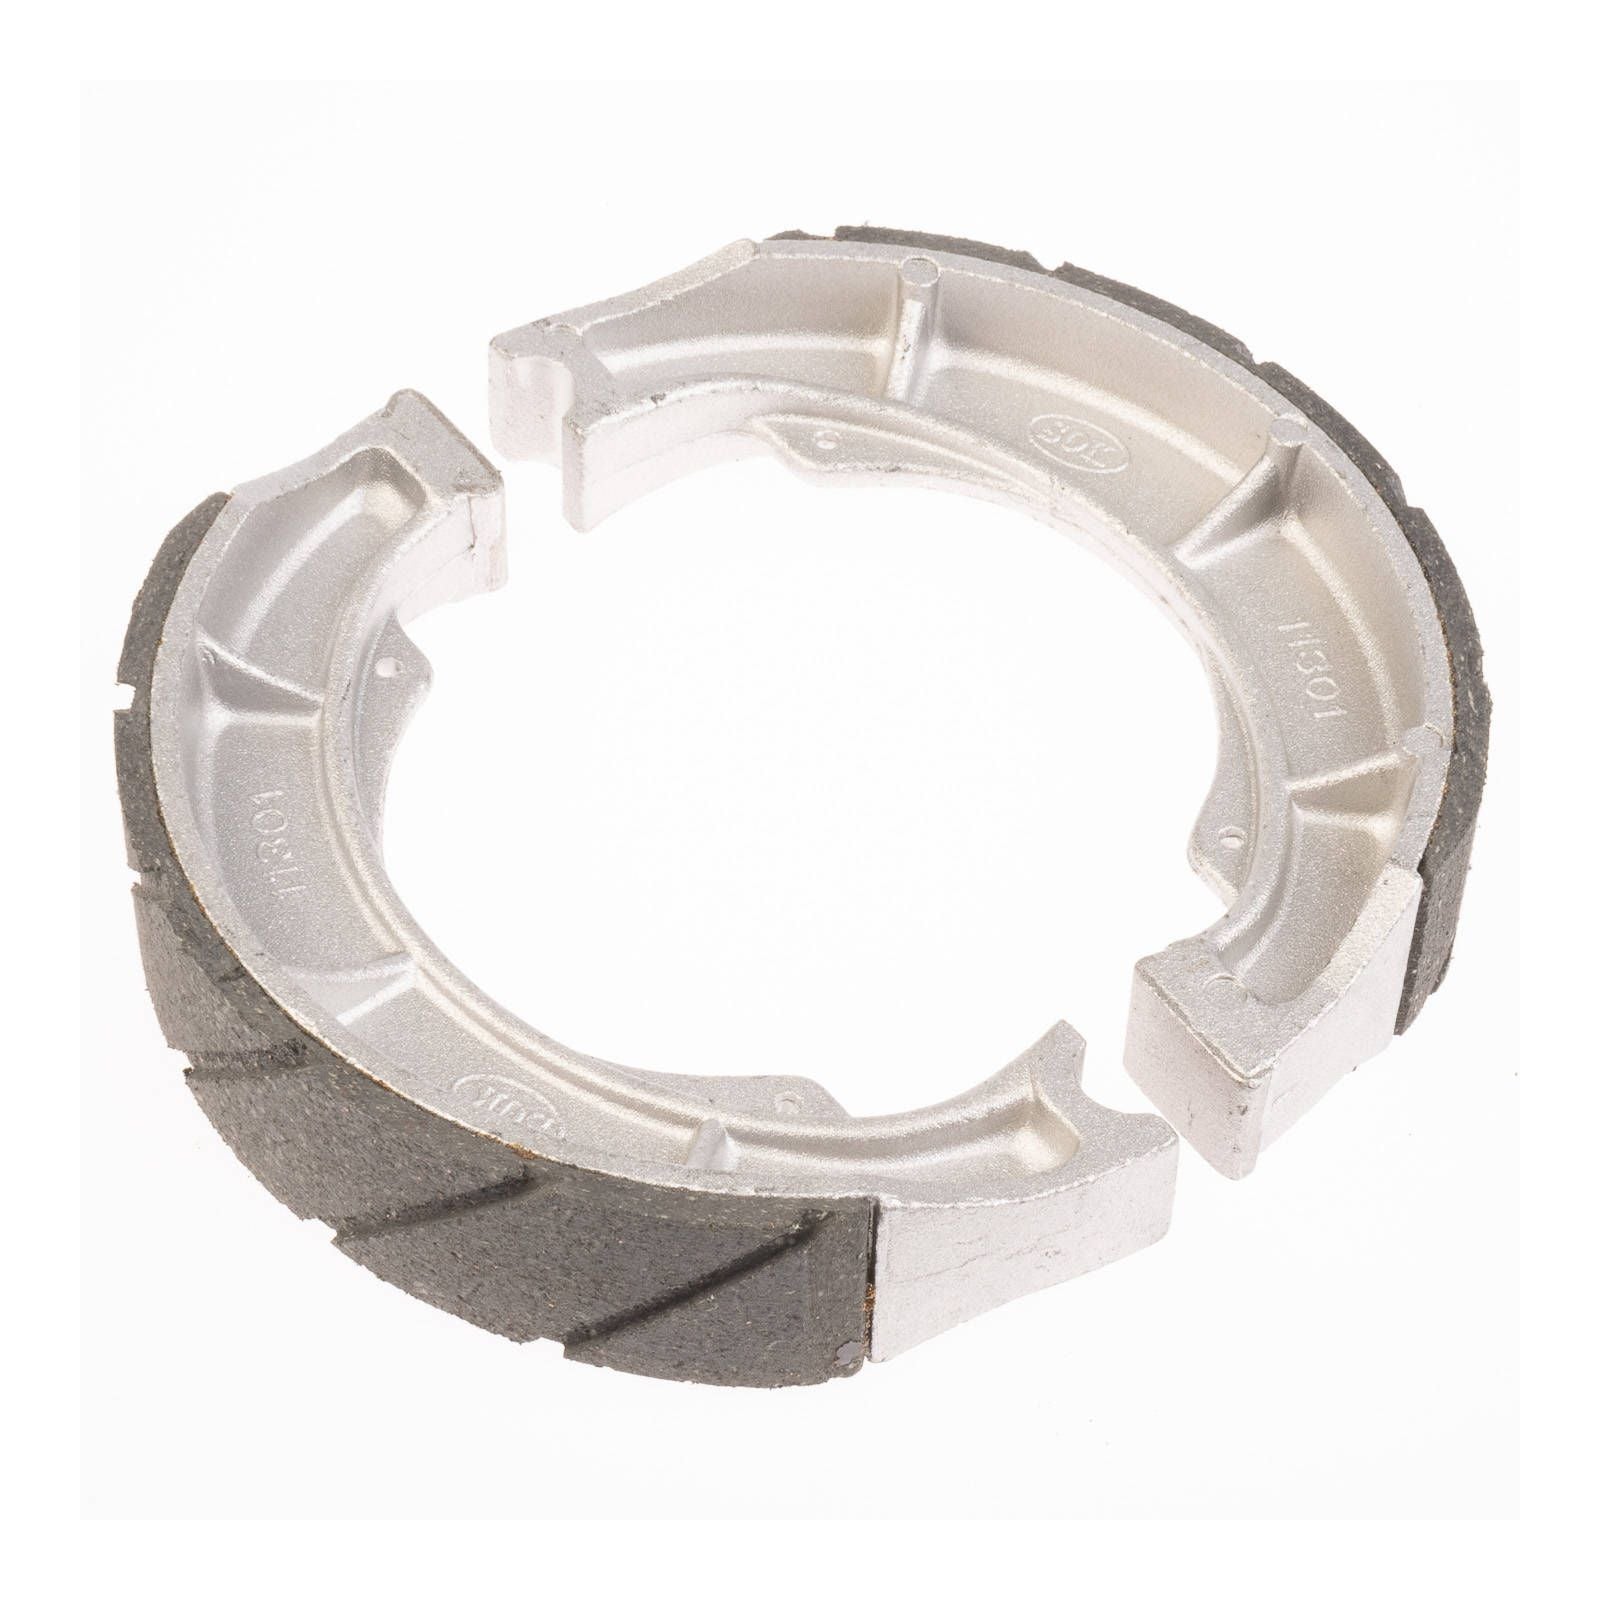 New WHITES Motorcycle Brake Shoes - Water Groove #WPBS41055